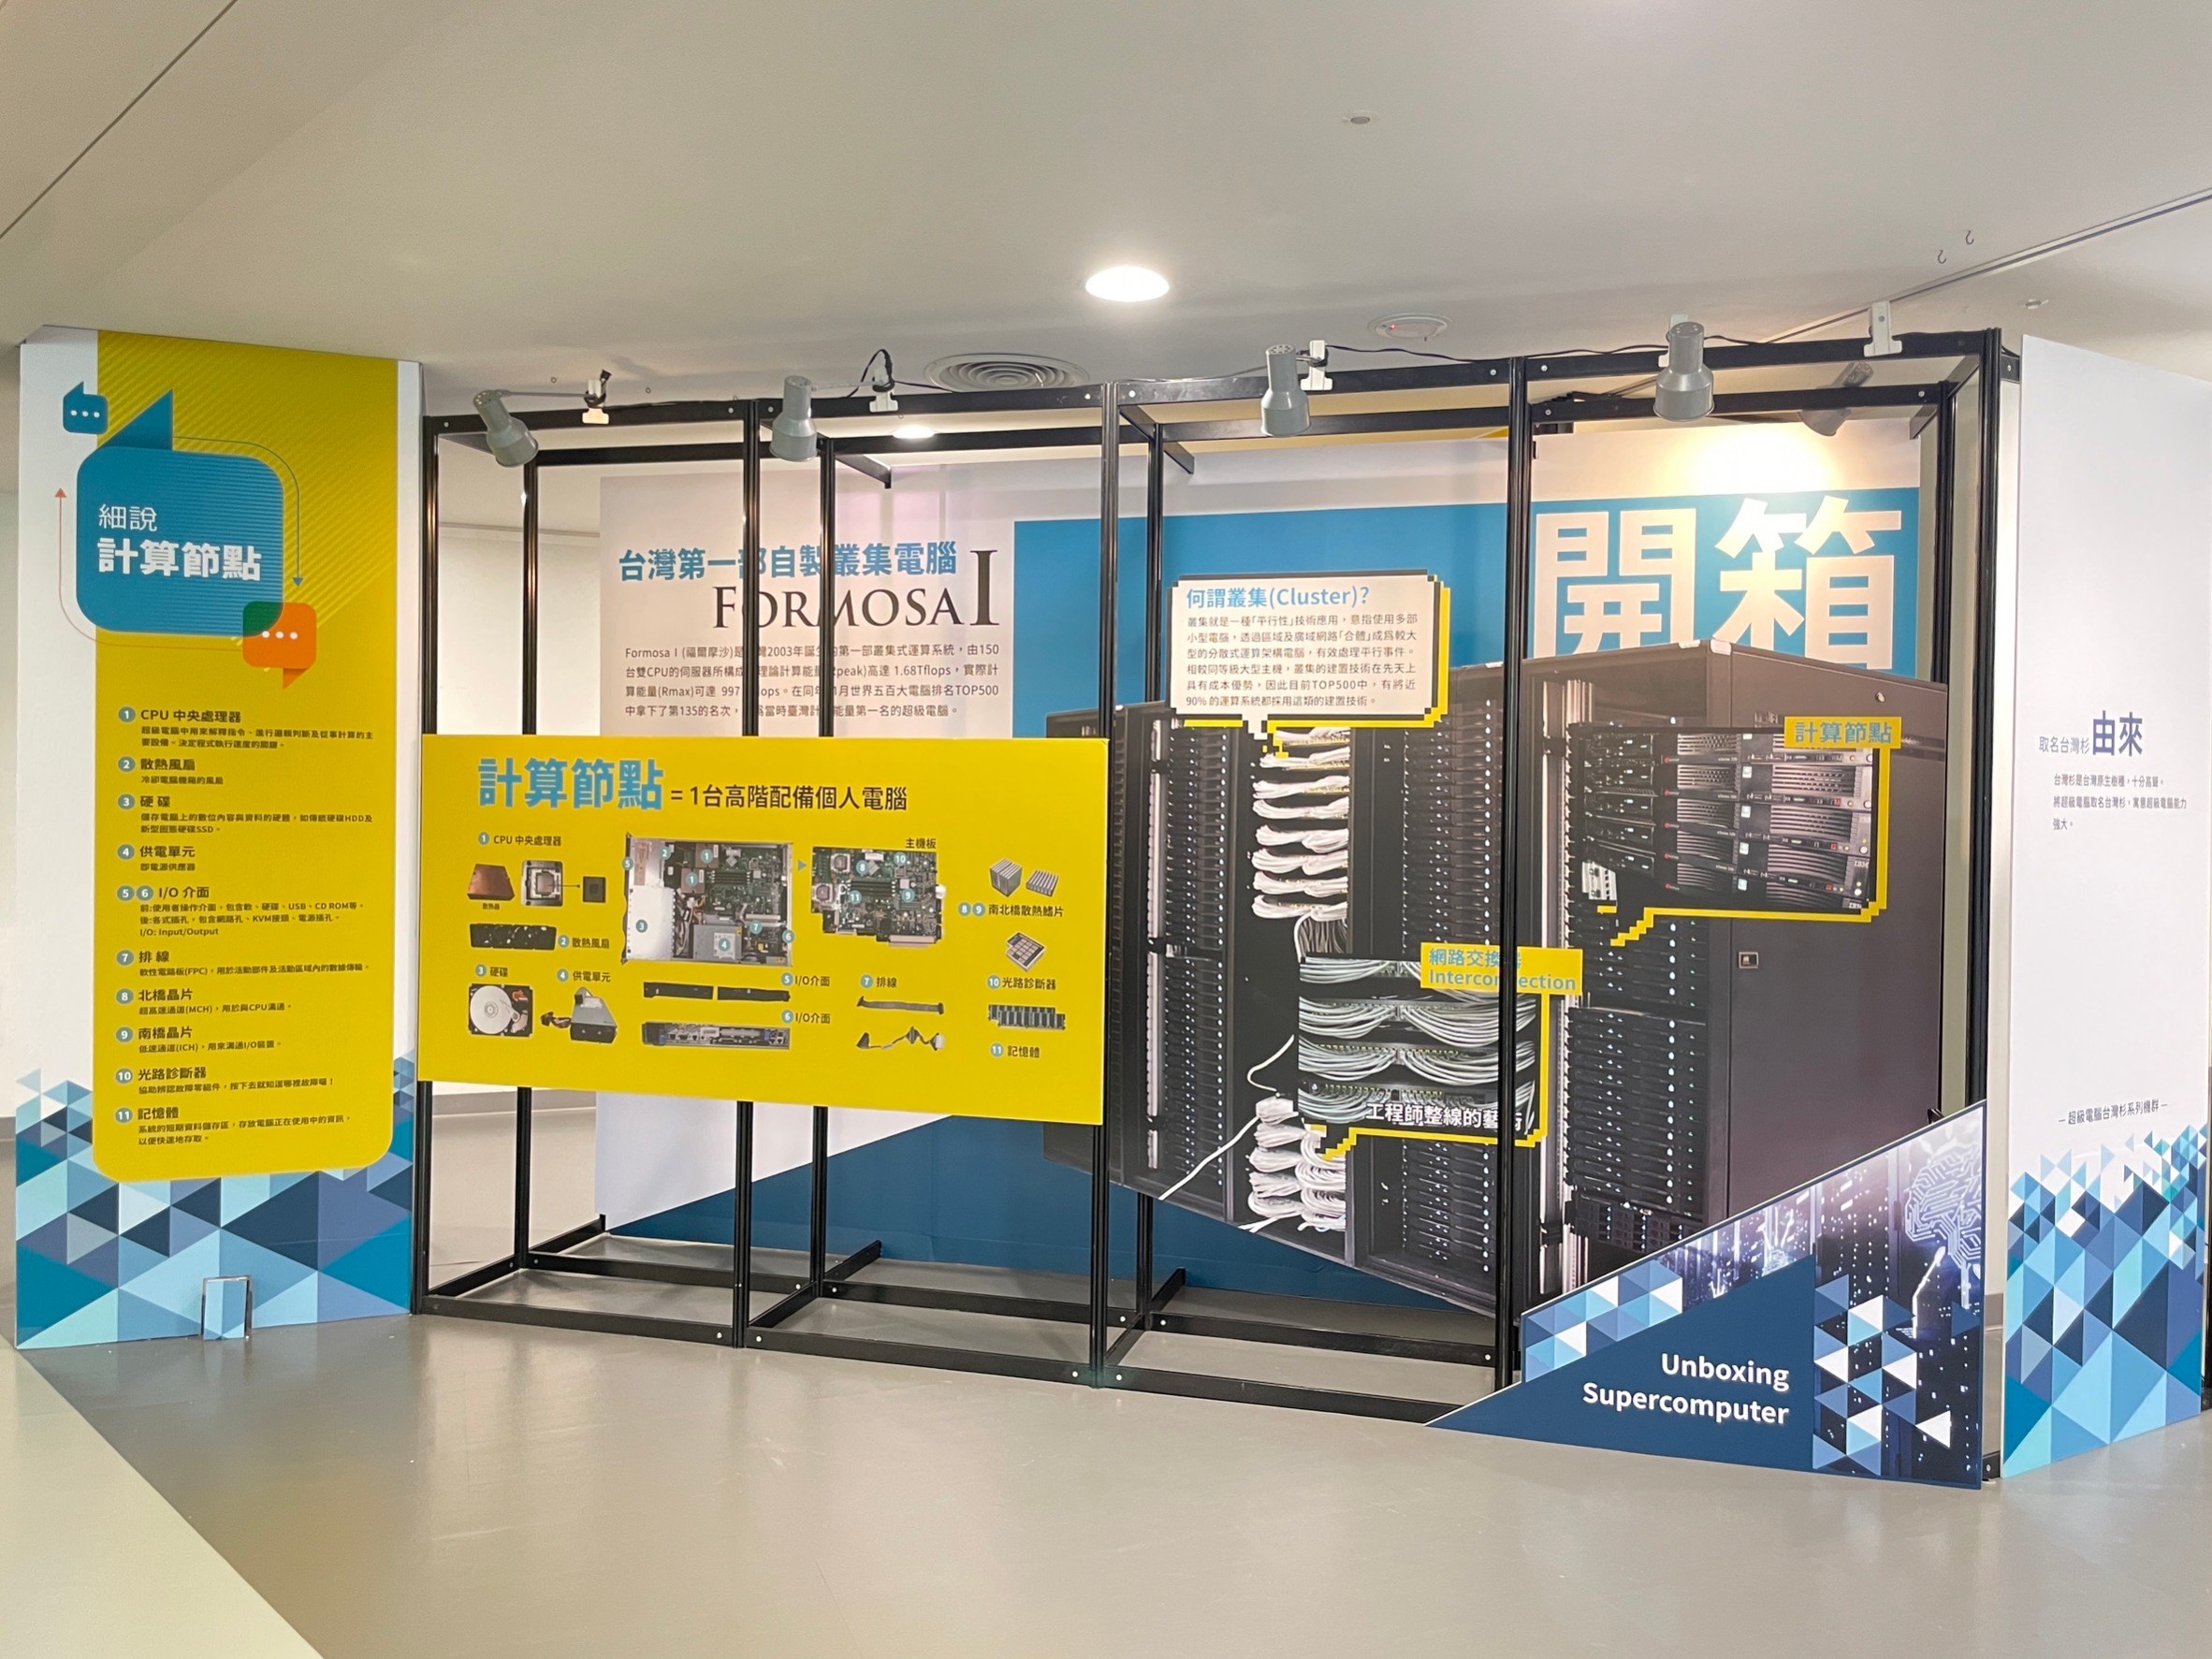 Beginning on 7/25, the National Center for High-performance Computing of National Applied Research Laboratories exhibits at the National Library of Public Information.